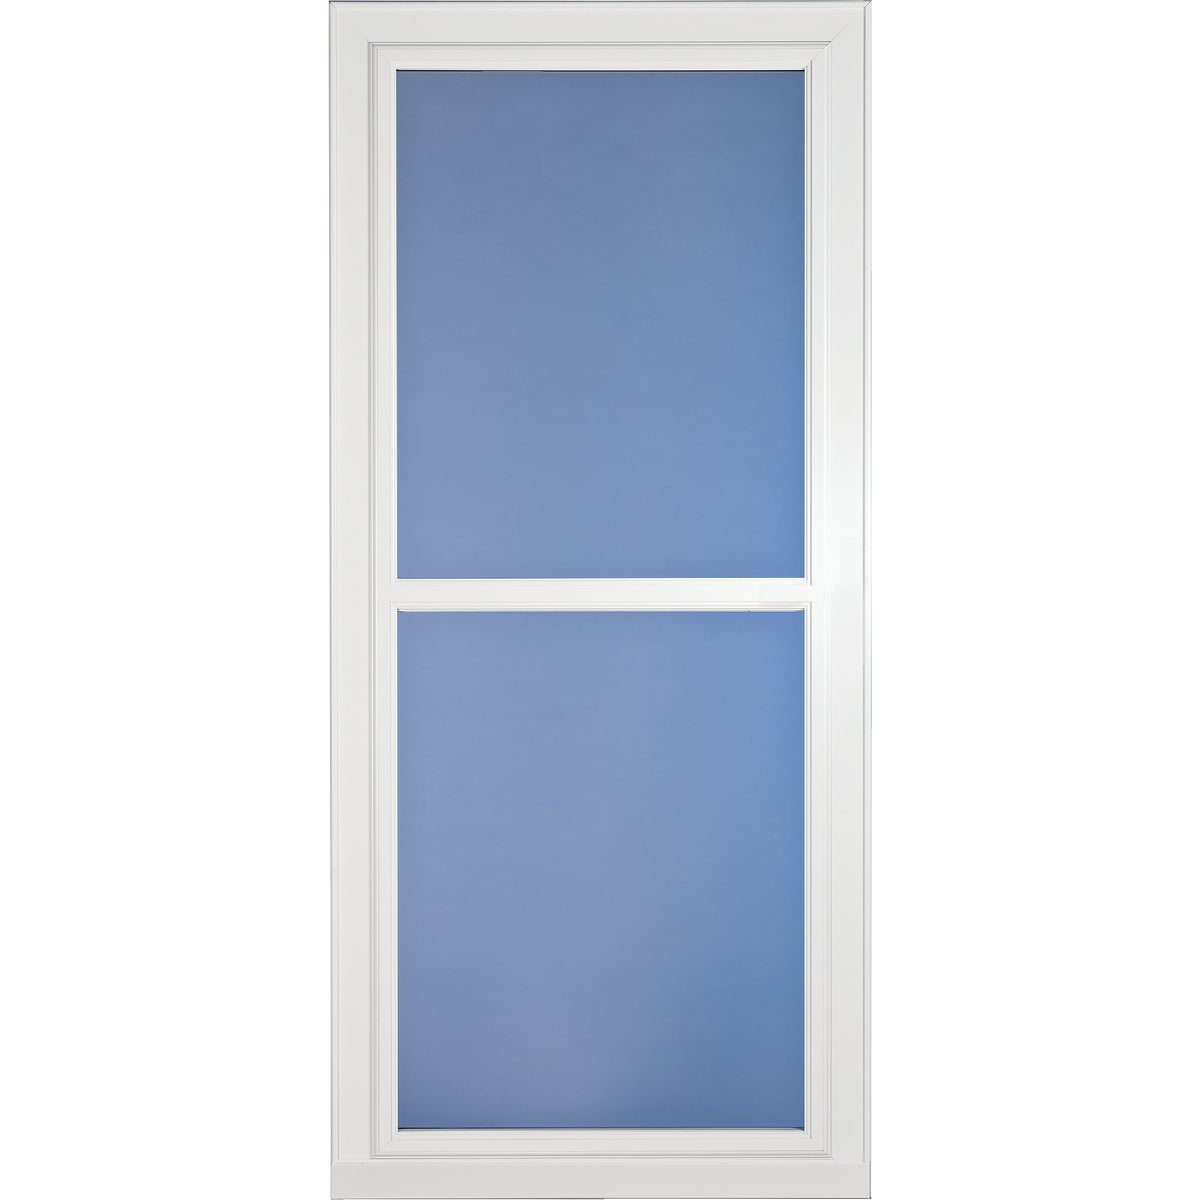 Larson Easy Vent 146 Series 32 In. W x 81 In. H x 1-7/8 In. Thick White Full View Aluminum Storm Door